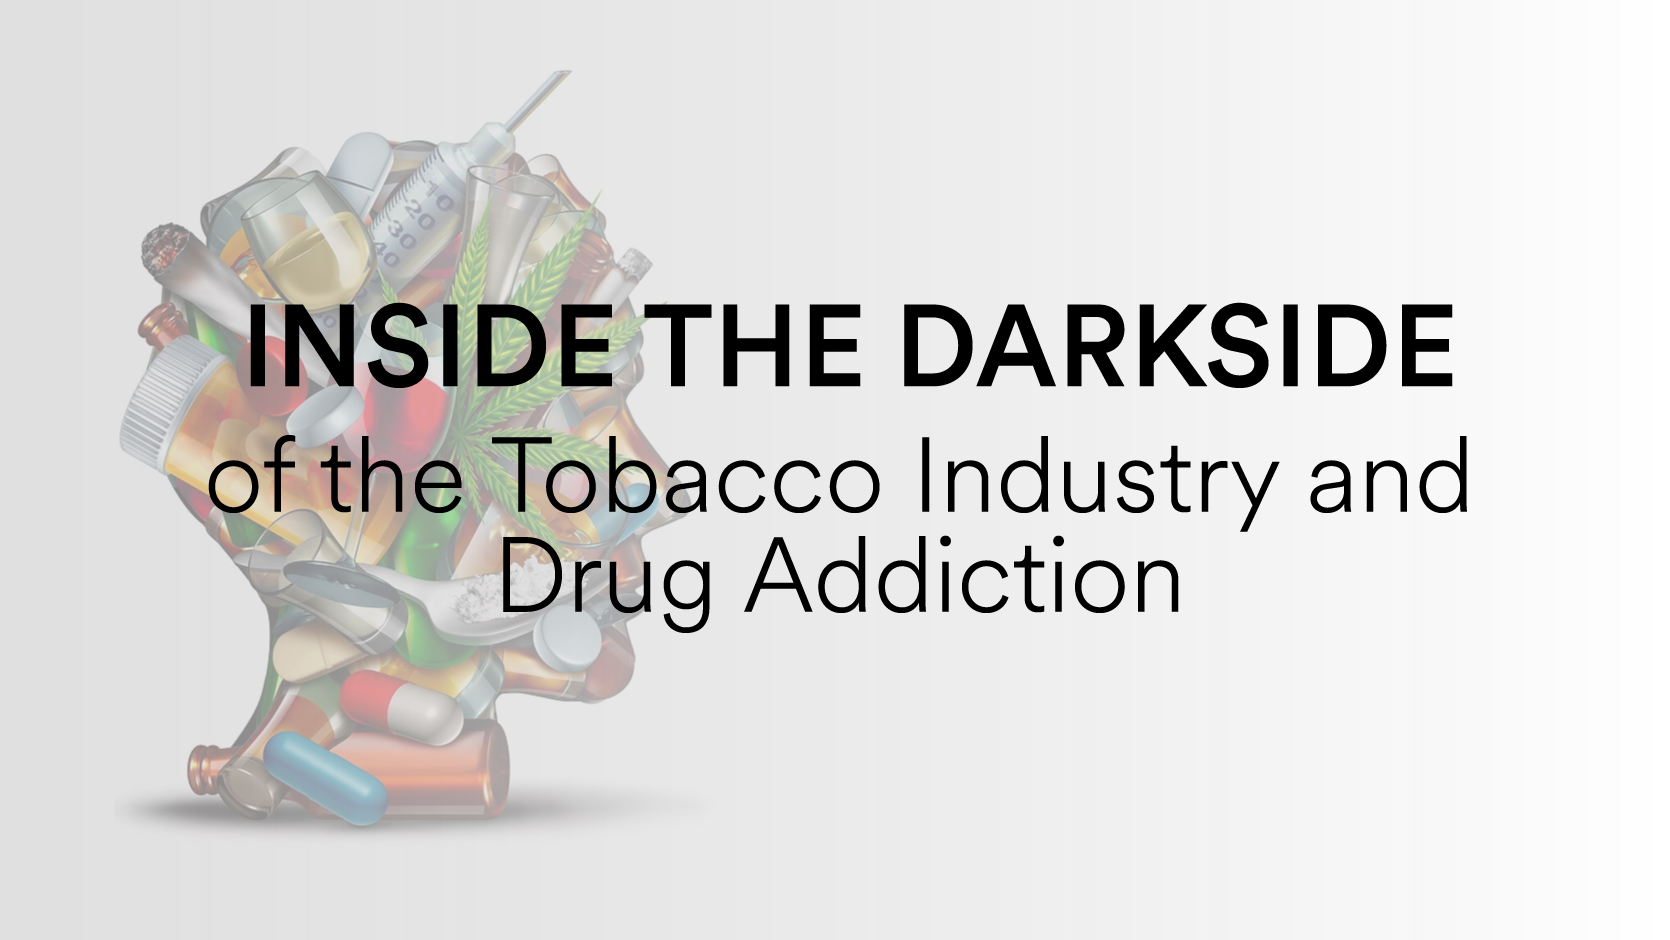 Inside the Darkside of the Tobacco Industry and Drug Addiction